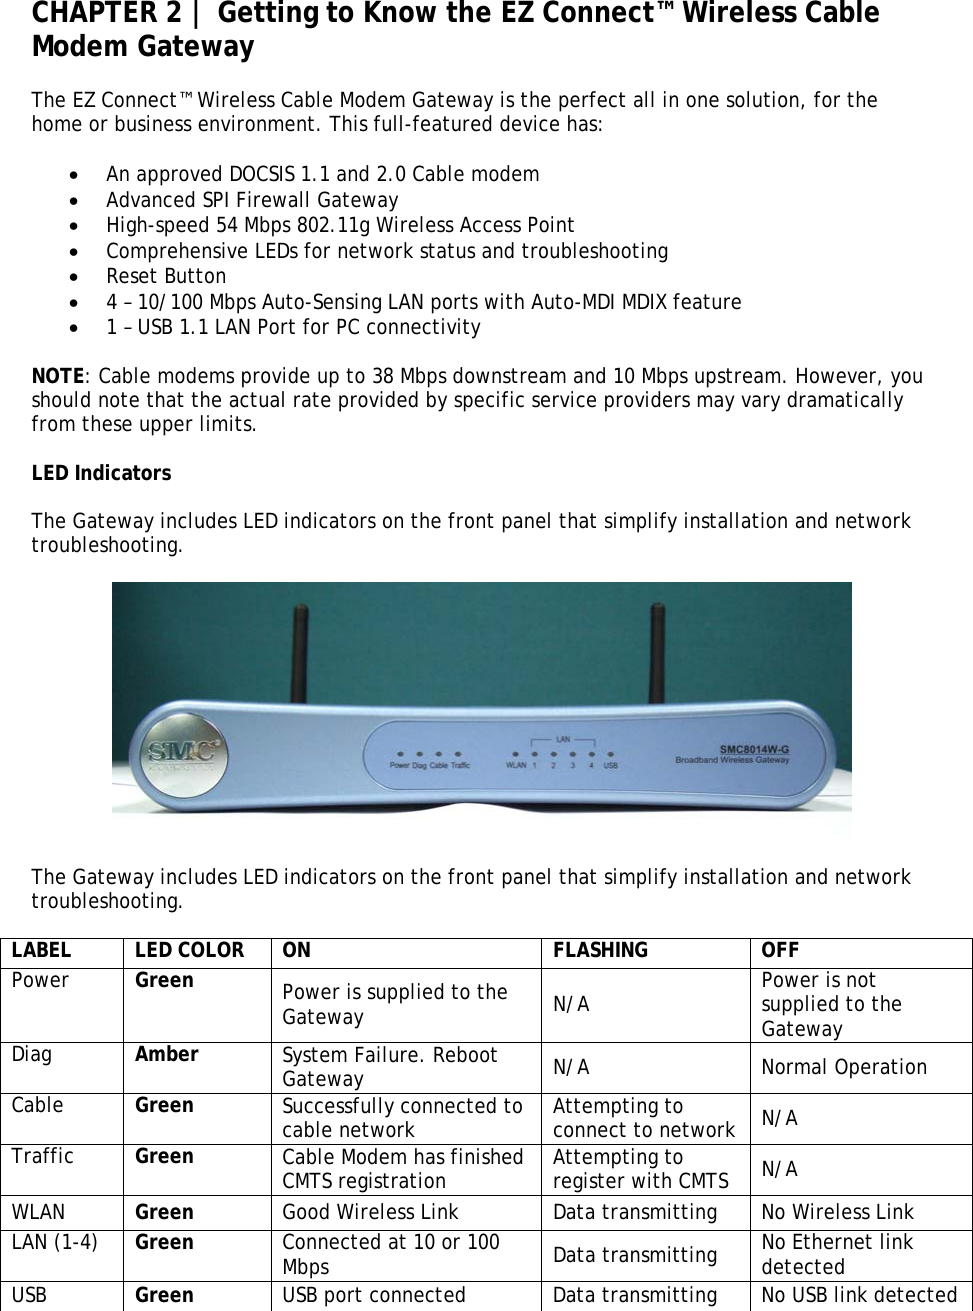 CHAPTER 2 | Getting to Know the EZ Connect™ Wireless Cable Modem Gateway  The EZ Connect™ Wireless Cable Modem Gateway is the perfect all in one solution, for the home or business environment. This full-featured device has:  • An approved DOCSIS 1.1 and 2.0 Cable modem • Advanced SPI Firewall Gateway • High-speed 54 Mbps 802.11g Wireless Access Point • Comprehensive LEDs for network status and troubleshooting • Reset Button • 4 – 10/100 Mbps Auto-Sensing LAN ports with Auto-MDI MDIX feature • 1 – USB 1.1 LAN Port for PC connectivity  NOTE: Cable modems provide up to 38 Mbps downstream and 10 Mbps upstream. However, you should note that the actual rate provided by specific service providers may vary dramatically from these upper limits.  LED Indicators  The Gateway includes LED indicators on the front panel that simplify installation and network troubleshooting.    The Gateway includes LED indicators on the front panel that simplify installation and network troubleshooting.  LABEL LED COLOR ON  FLASHING  OFF Power  Green  Power is supplied to the Gateway  N/A  Power is not supplied to the Gateway Diag  Amber  System Failure. Reboot Gateway  N/A Normal Operation Cable  Green  Successfully connected to cable network  Attempting to connect to network  N/A Traffic  Green  Cable Modem has finished CMTS registration  Attempting to register with CMTS  N/A WLAN  Green  Good Wireless Link   Data transmitting  No Wireless Link LAN (1-4)  Green  Connected at 10 or 100 Mbps  Data transmitting  No Ethernet link detected USB  Green  USB port connected  Data transmitting  No USB link detected  